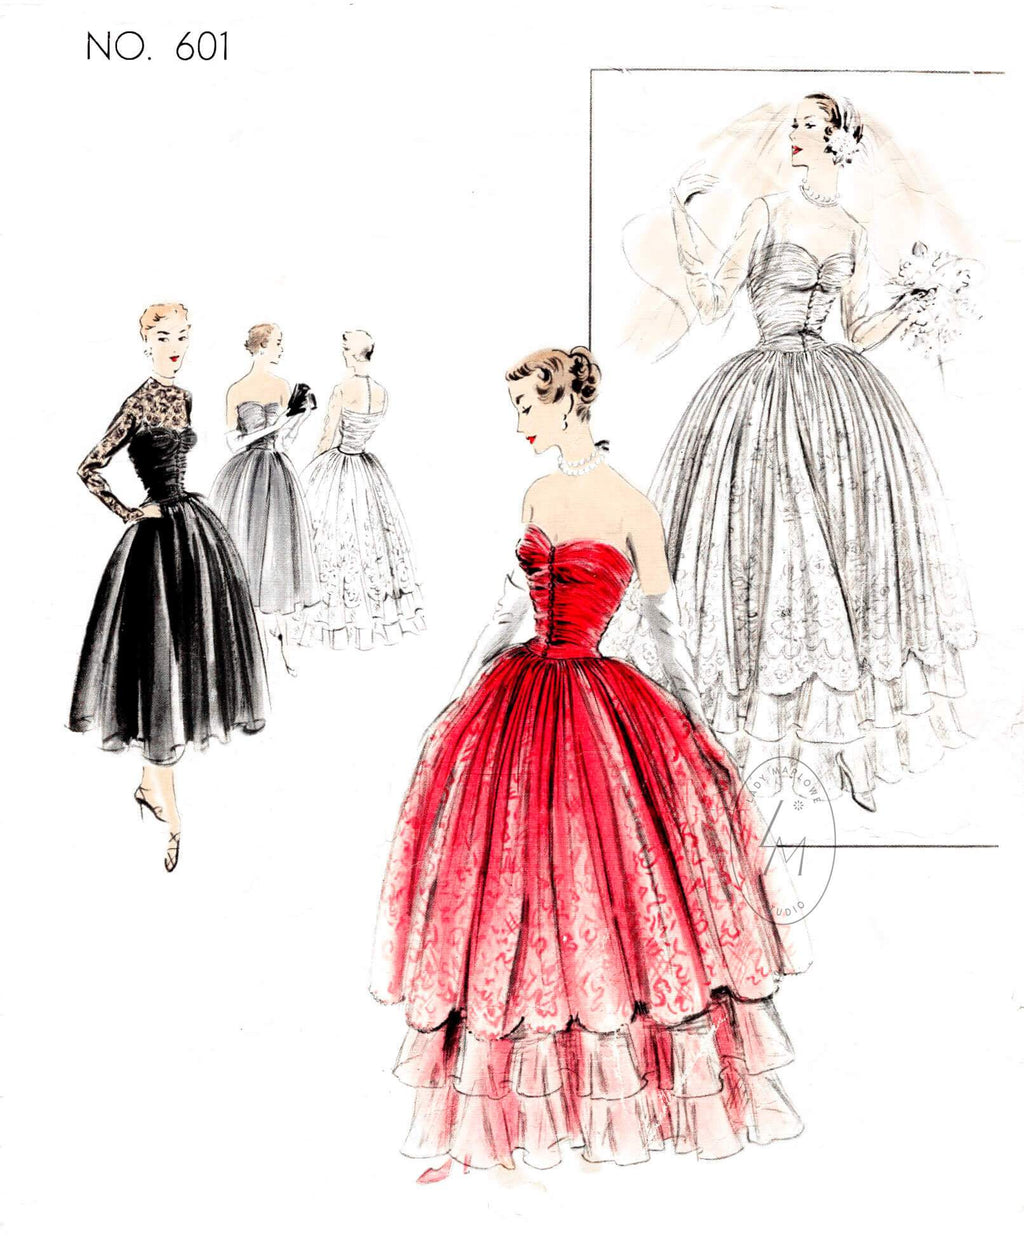 Details more than 230 ball gown fashion sketches